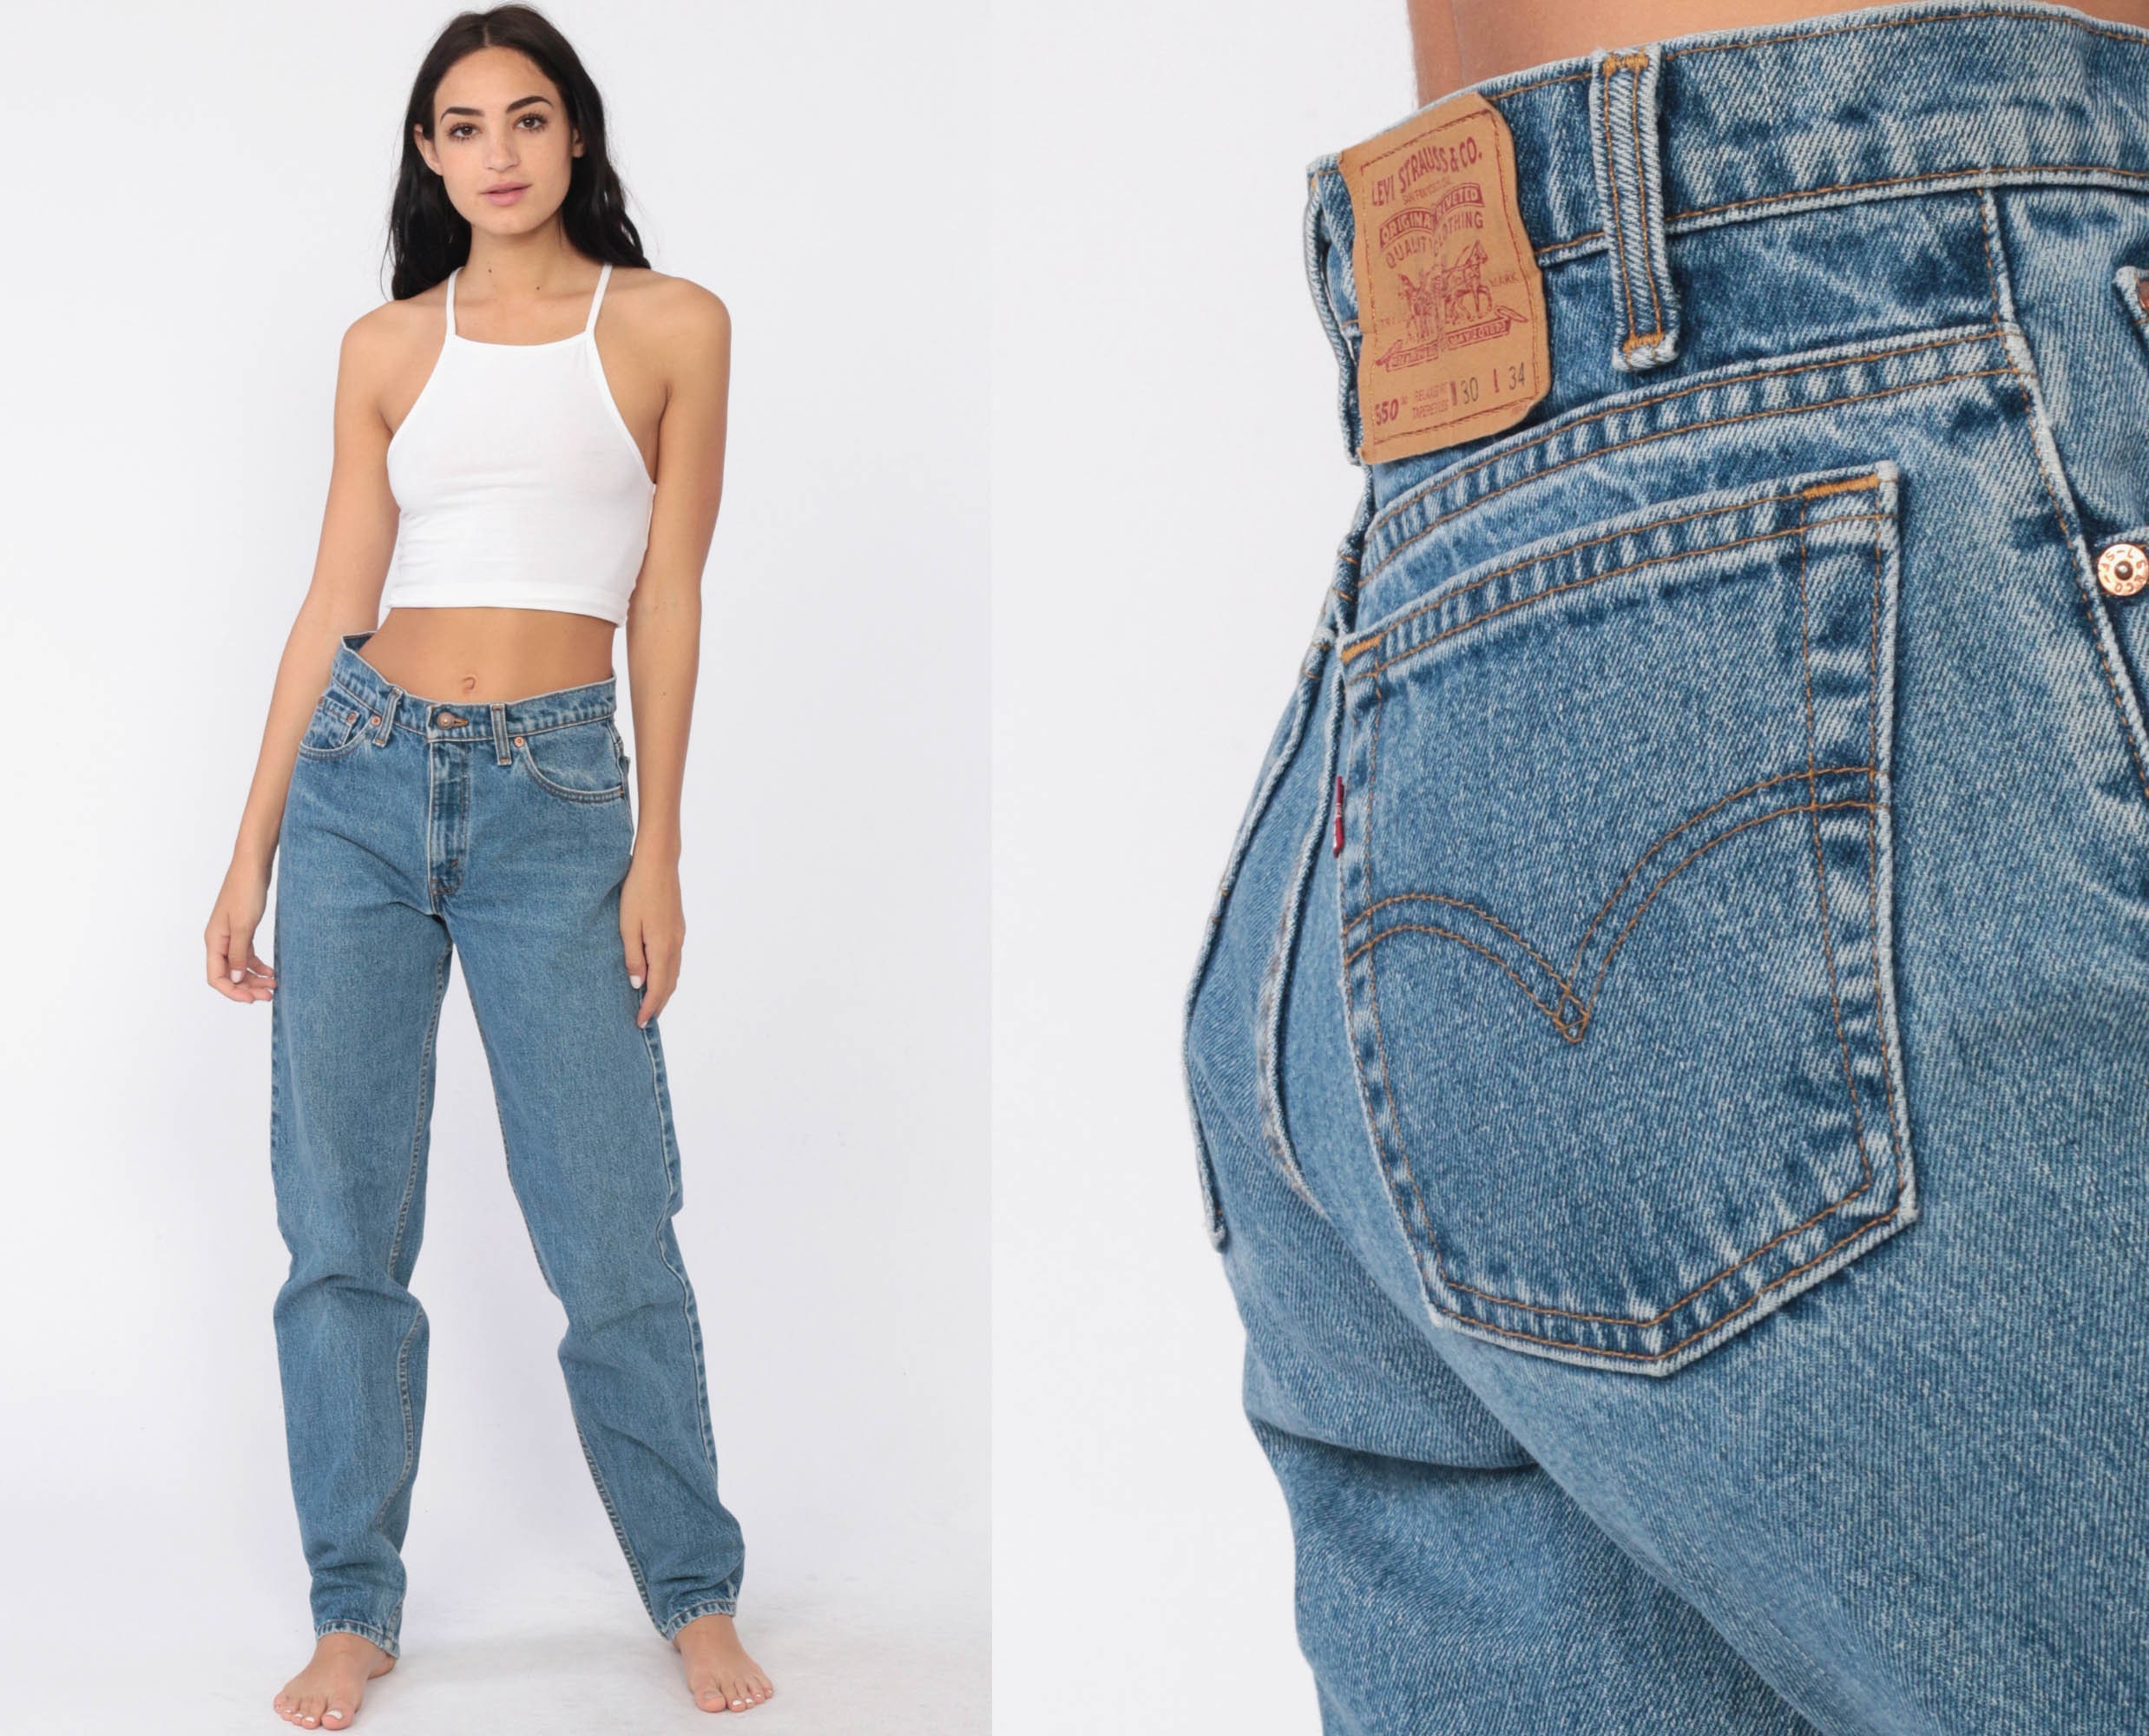 Levi Mom Jeans 30 X 33 Levis Jeans High Waist Jeans 80s Jeans Denim Pants 550 Relaxed Tapered